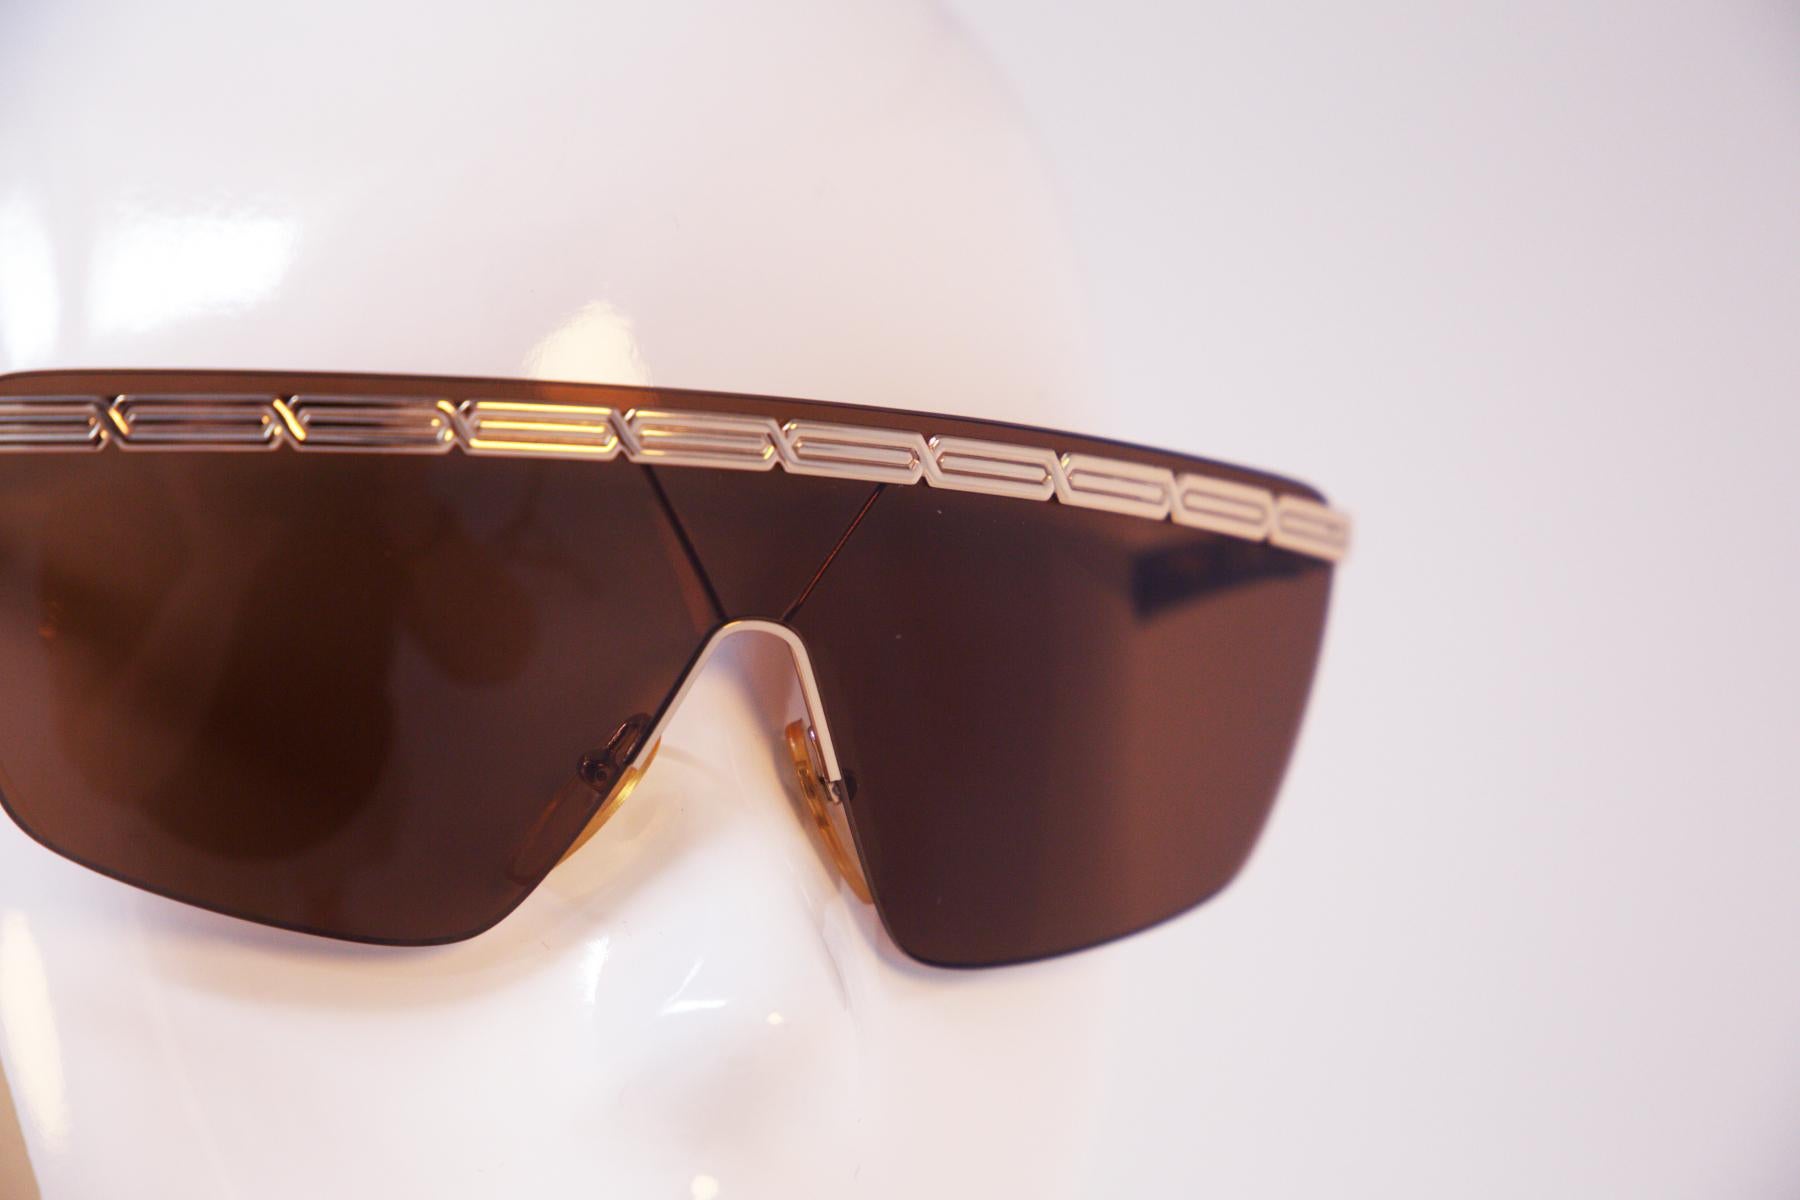 Luxurious original Nazareno Gabrielli sunglasses in gold and black made in the 1990s by the historic Italian fashion house Gabrielli, number 135.
This is a very refined and rare model of oversize mask.
The eyewear is a wonderful piece of futuristic